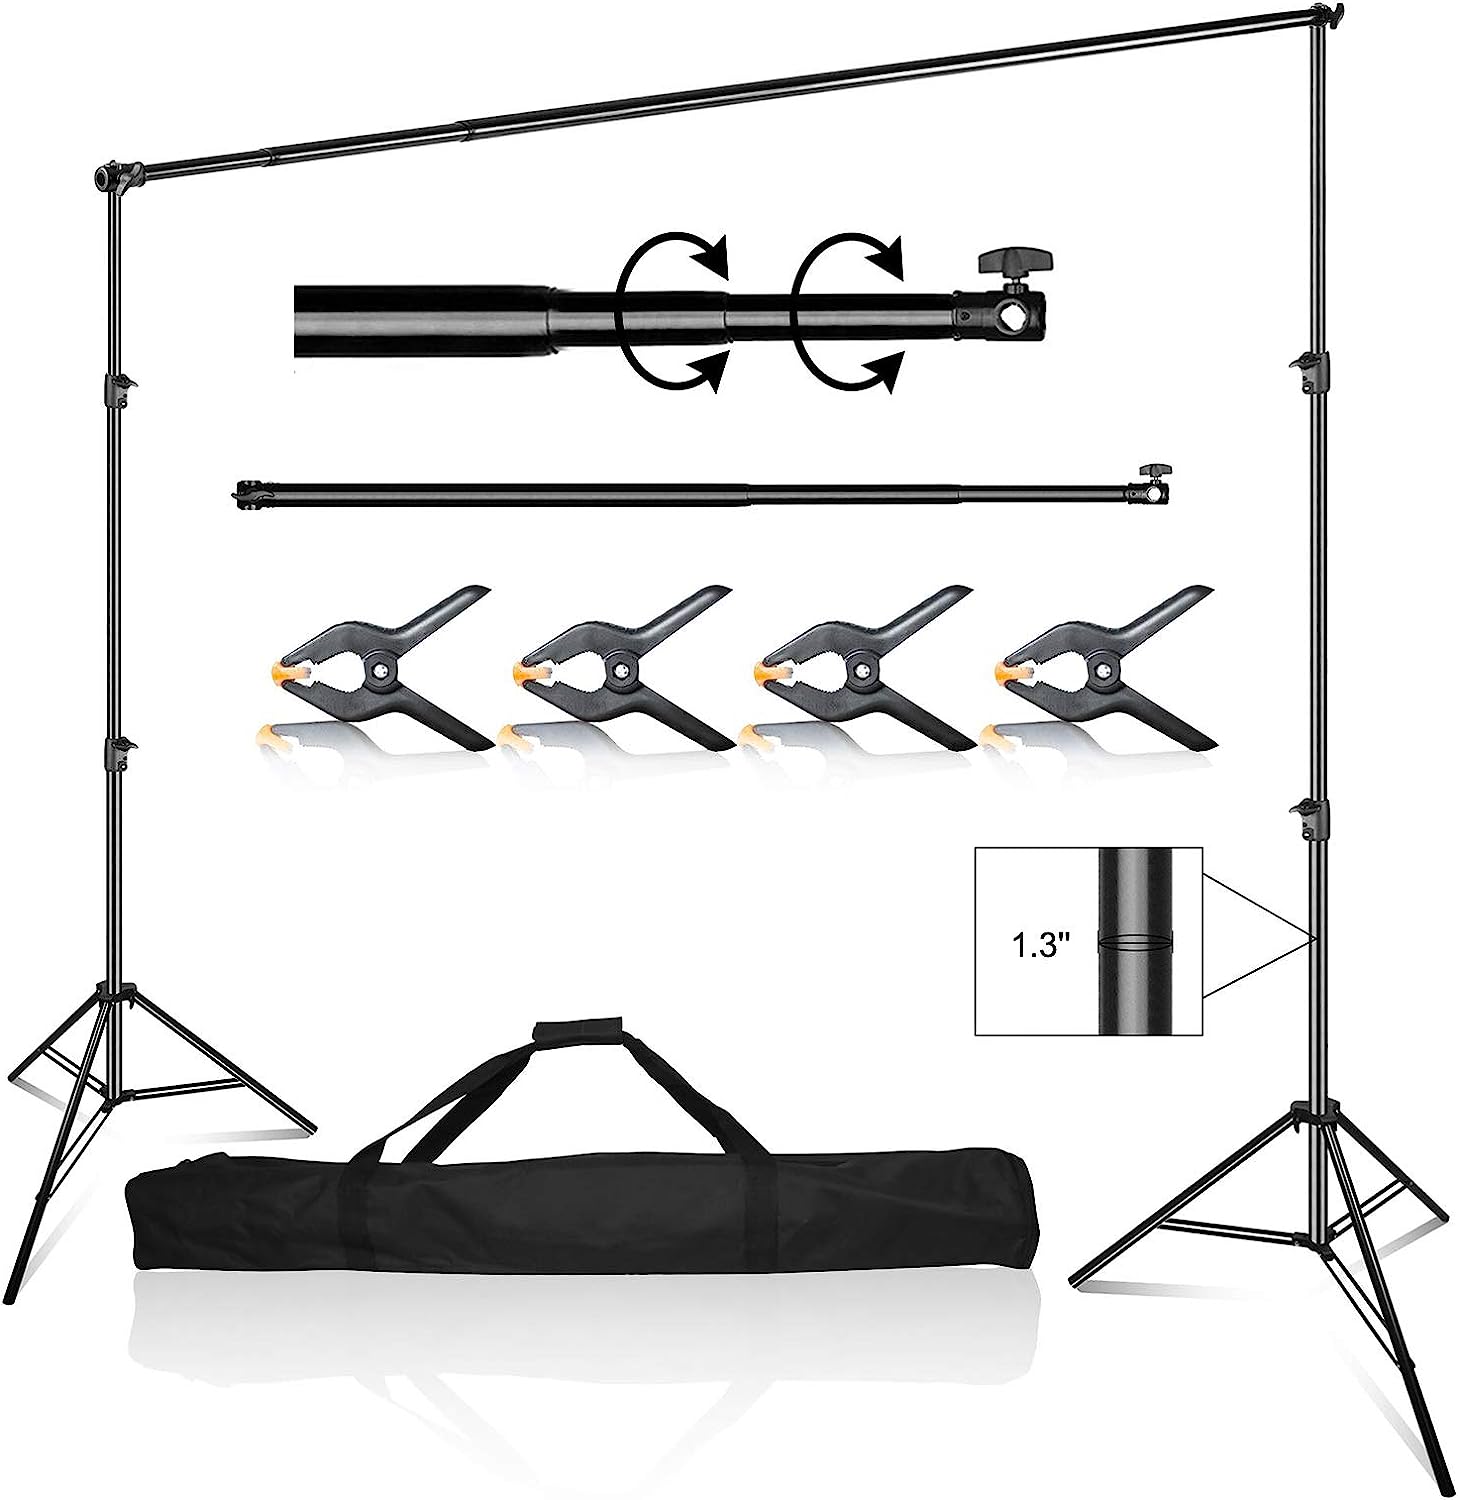 Emart Photo Video Studio 8.5 x 10ft Green Screen Backdrop Stand Kit, Photography Background Support System with 10 x12ft 100% Cotton Muslin